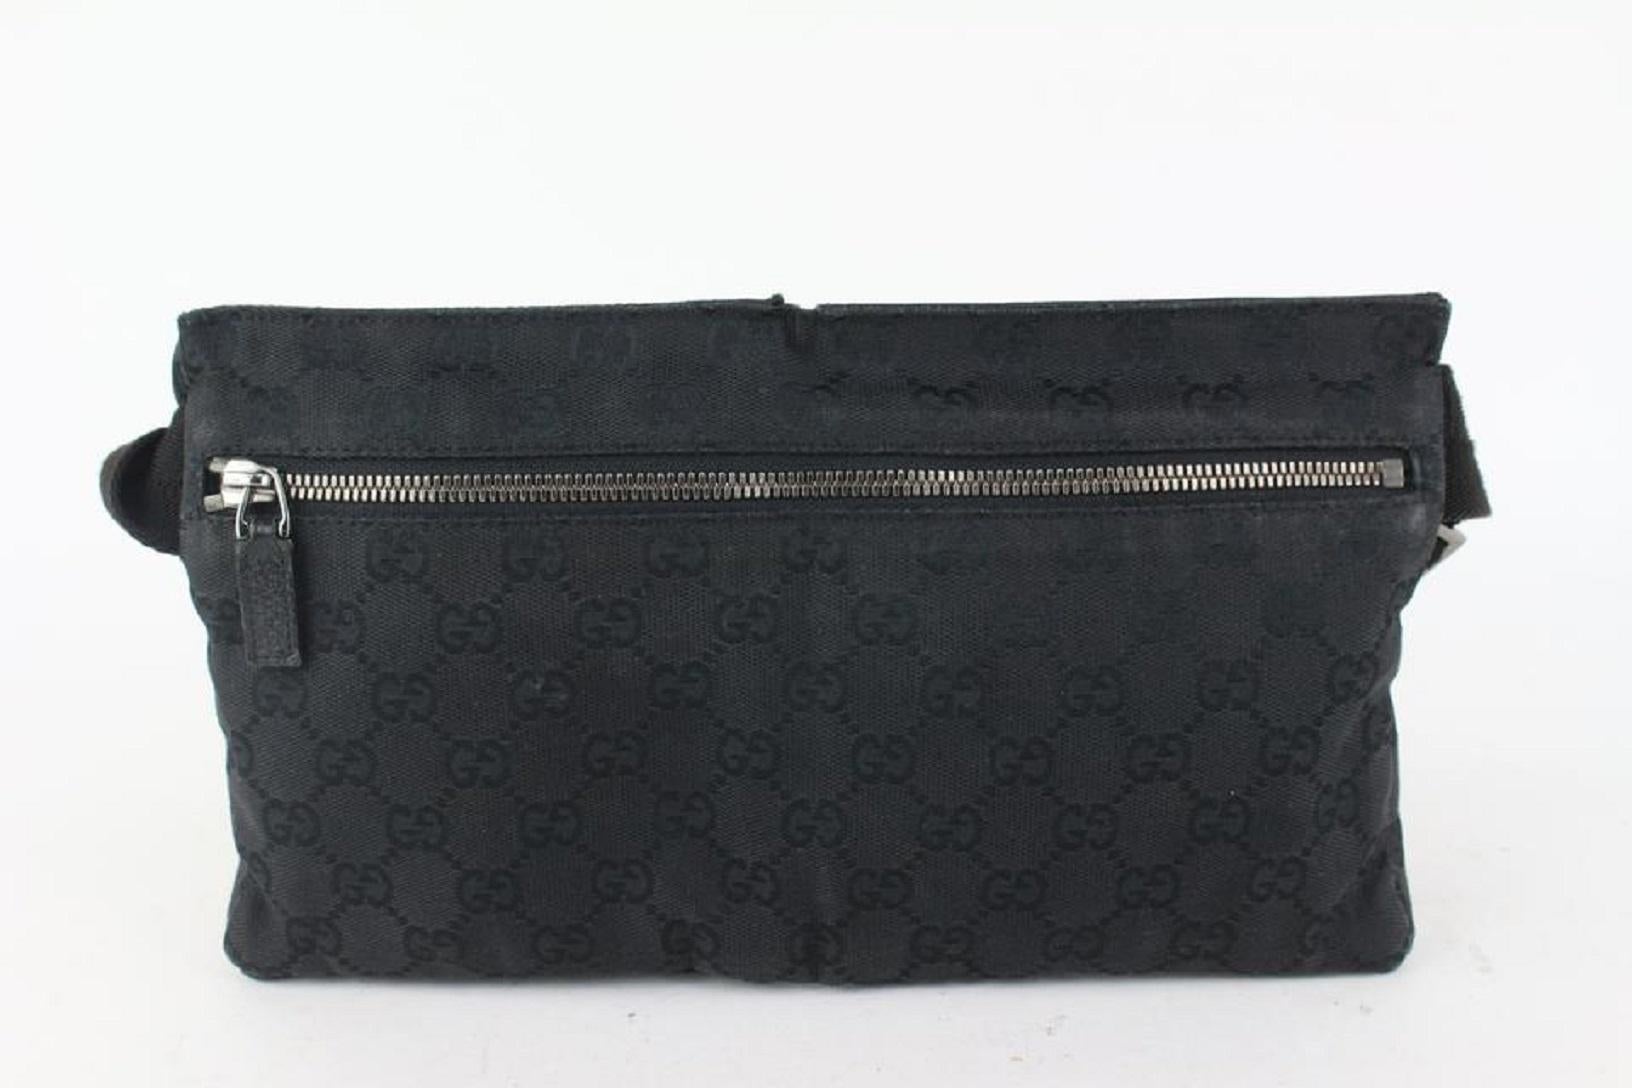 Gucci Black Monogram GG Belt Bag Fanny Pack Waist Pouch 105g5 In Good Condition In Dix hills, NY